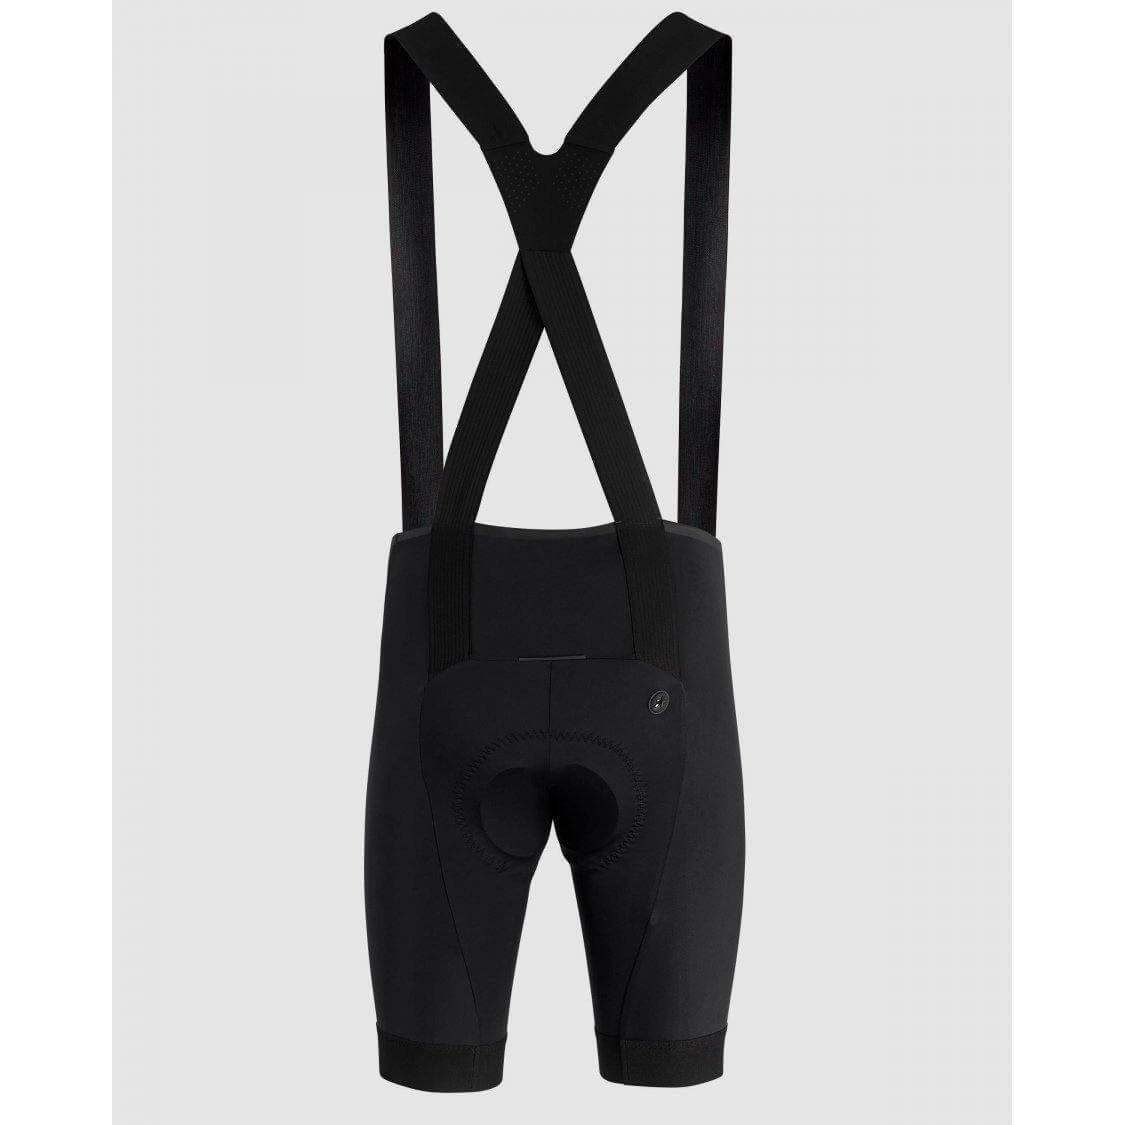 Assos of Switzerland Equipe RS Bib Short S9 | Strictly Bicycles